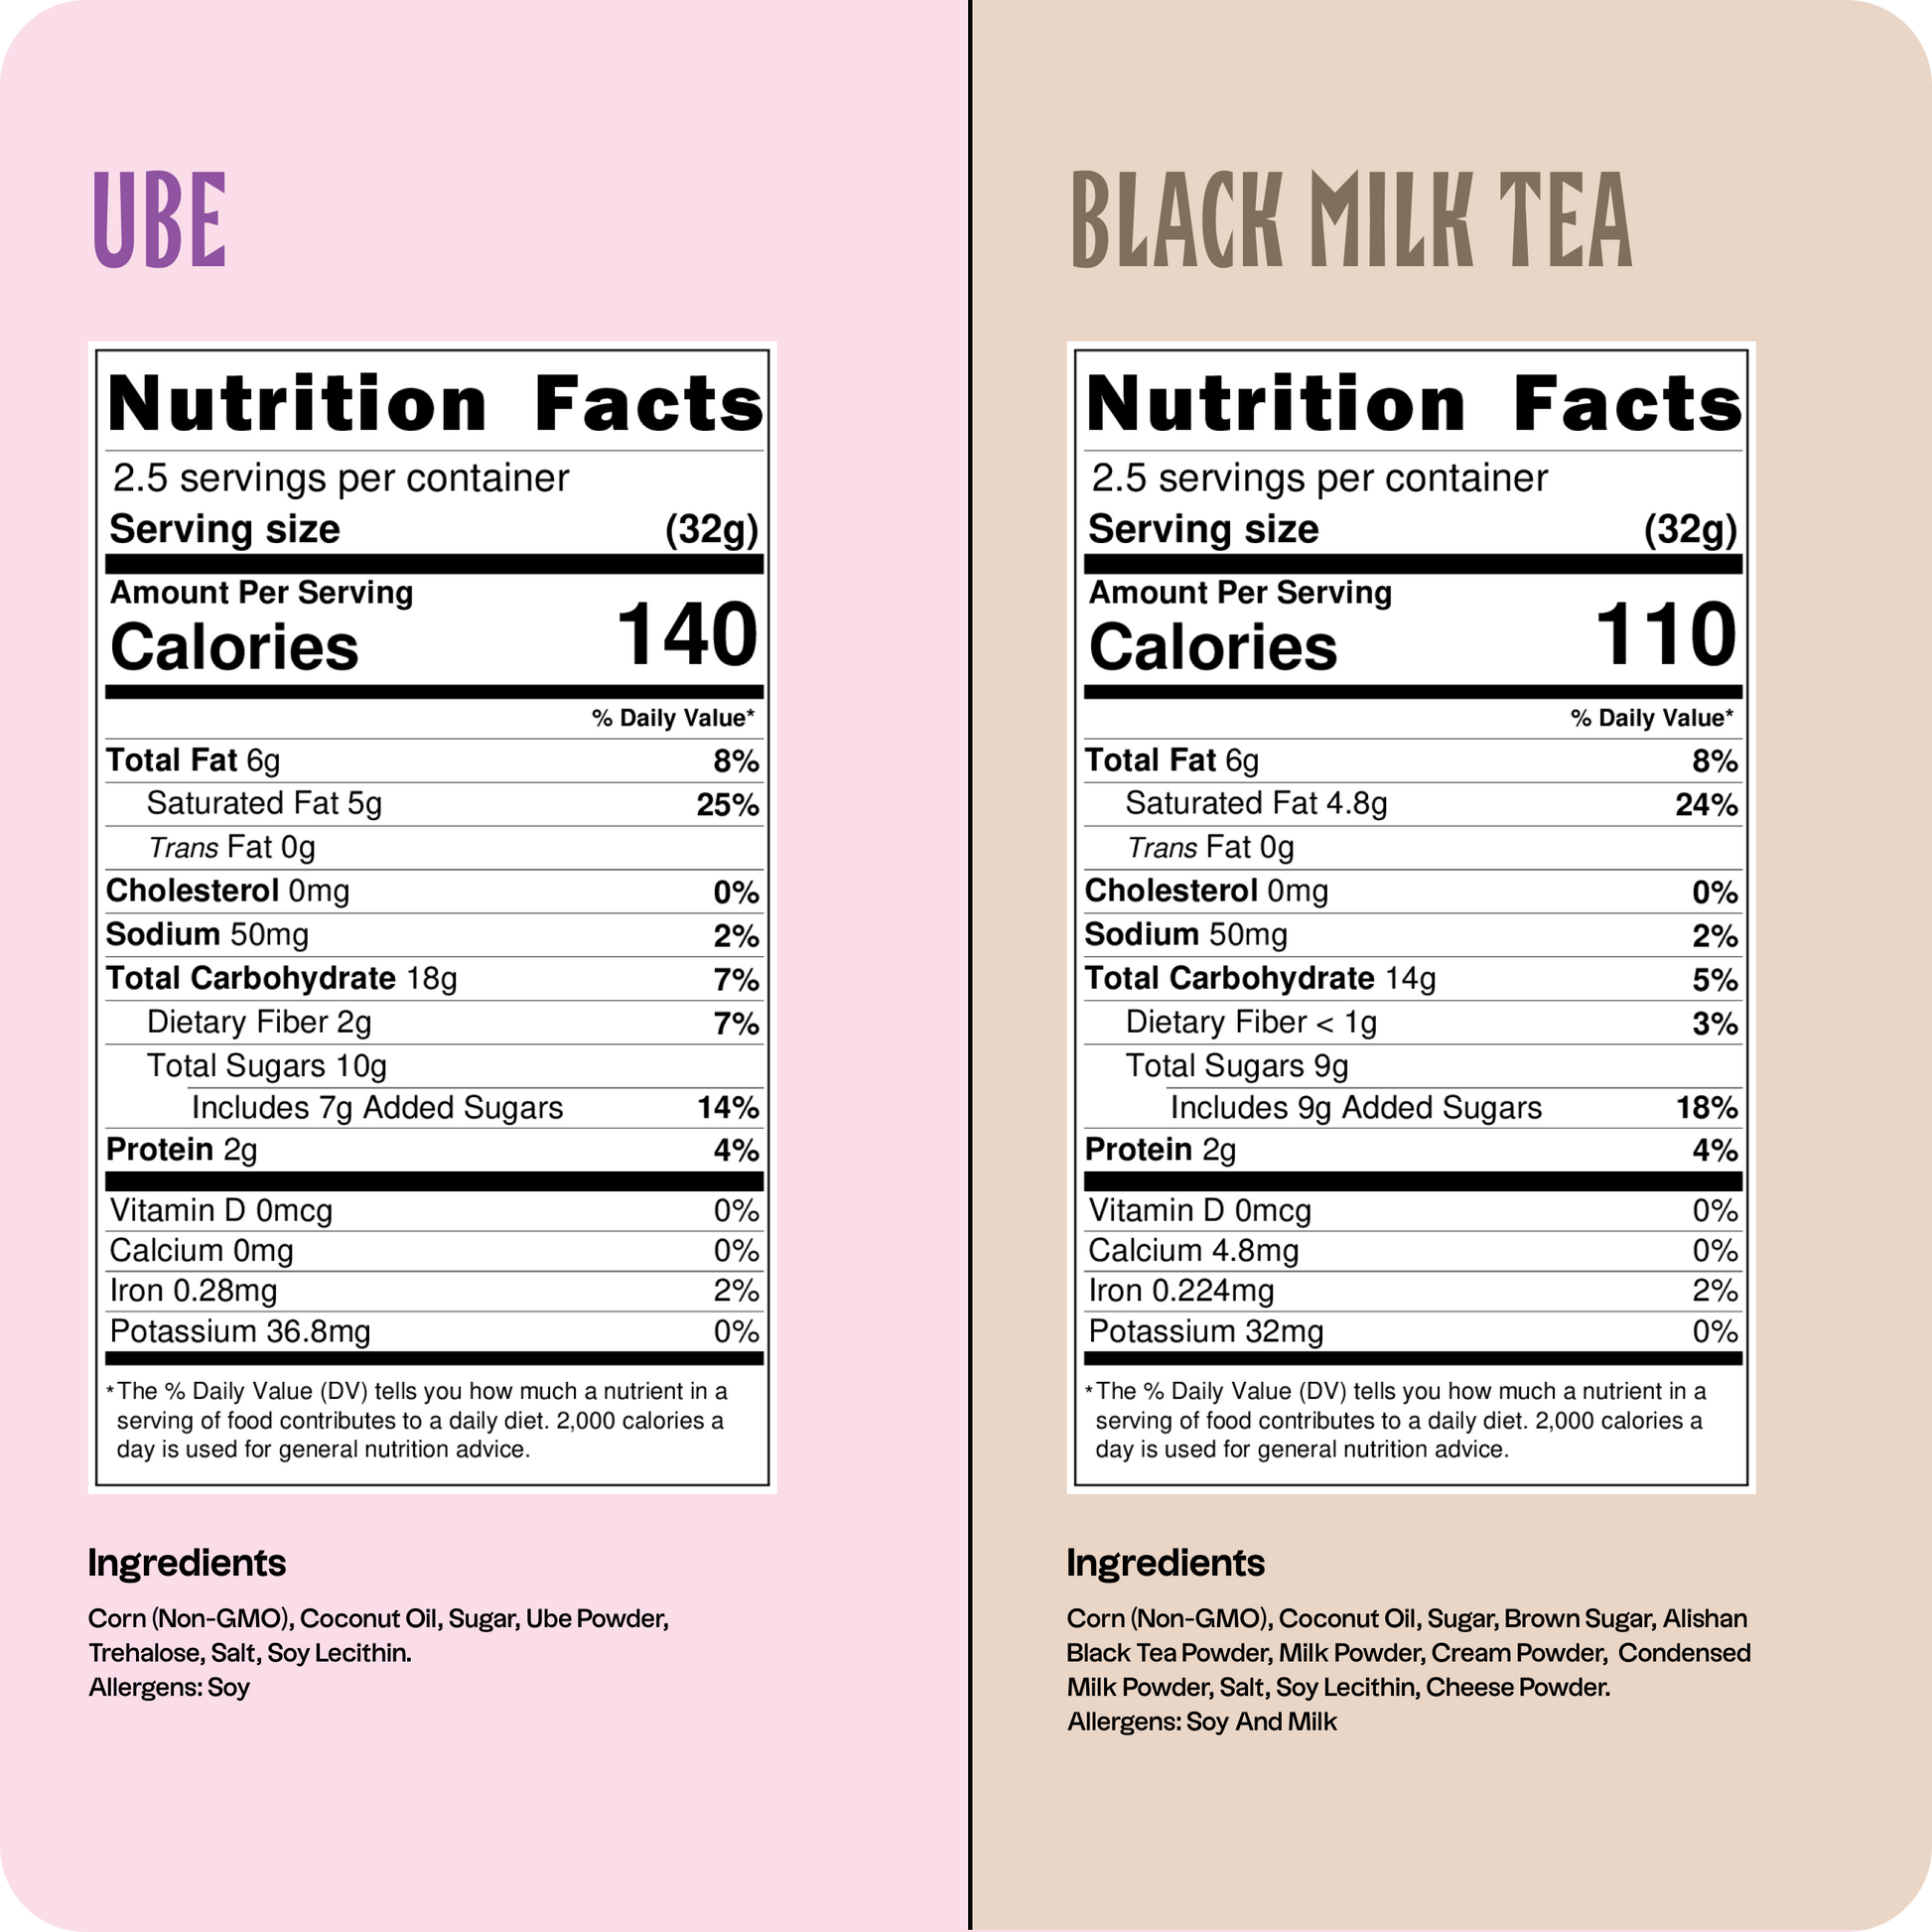 Nutrition Facts for the Ube and Black Milk Tea flavored popcorn